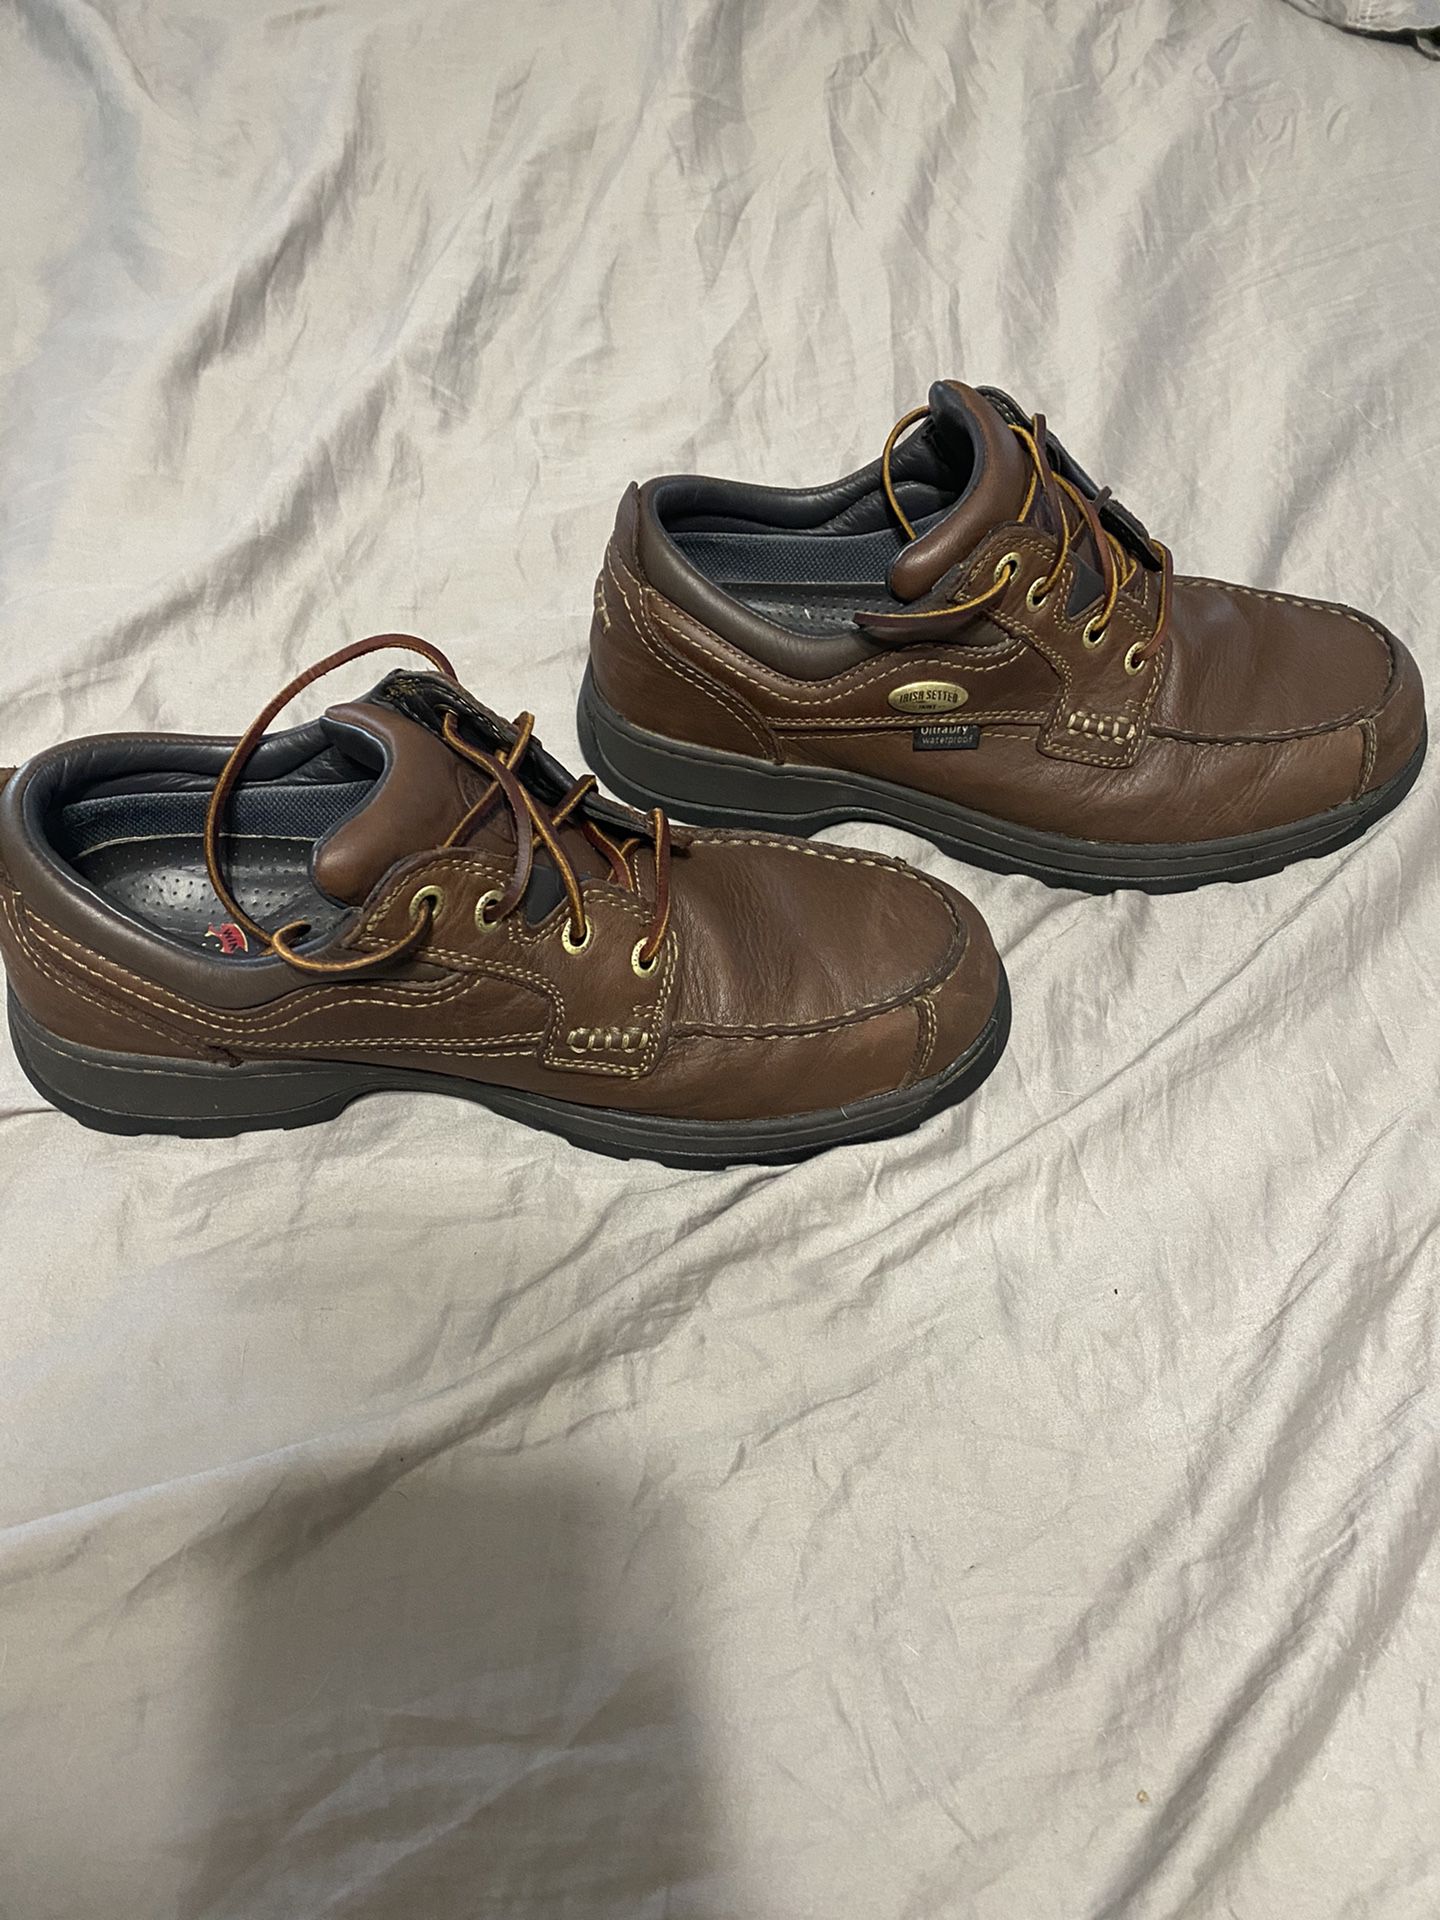 Red wing shoes 3874 size(11)